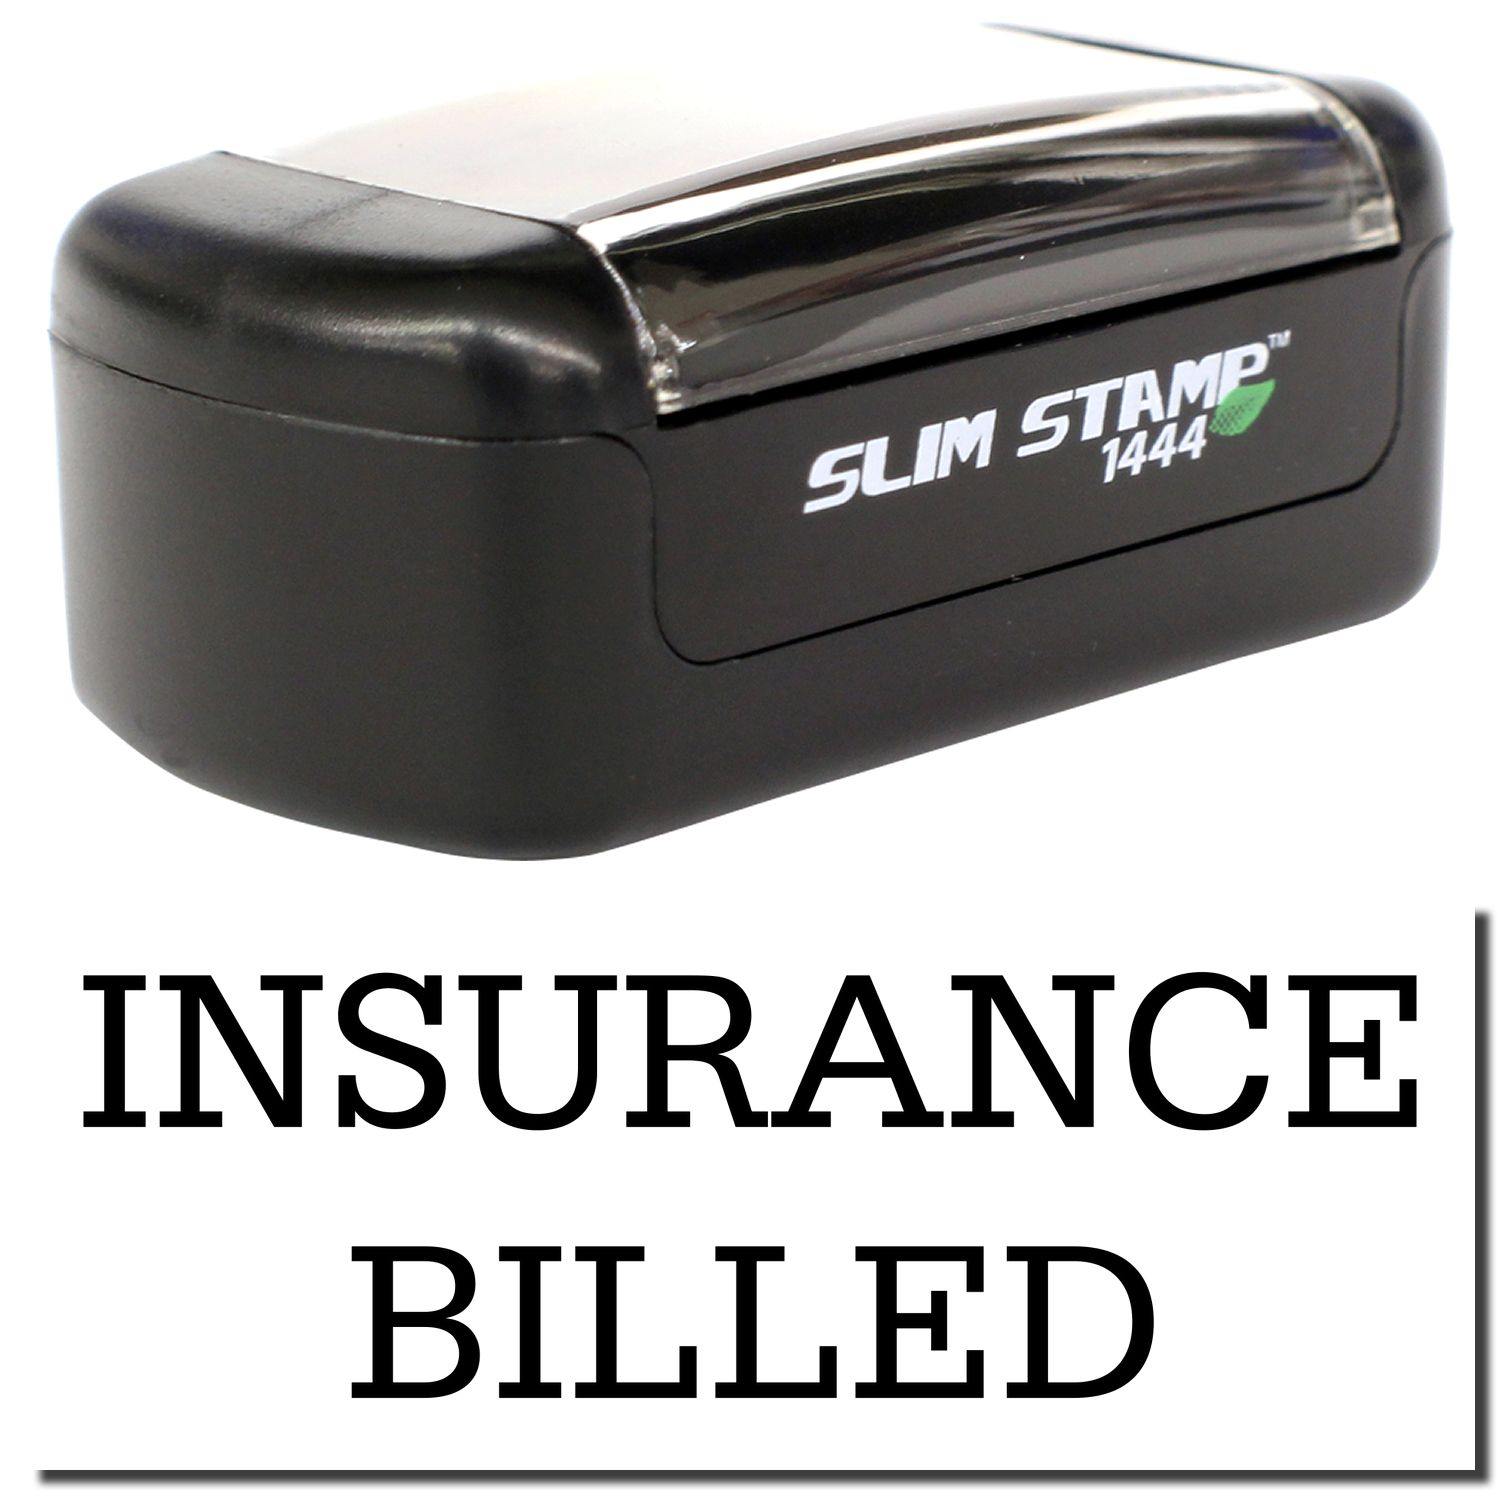 A stock office pre-inked stamp with a stamped image showing how the text "INSURANCE BILLED" is displayed after stamping.